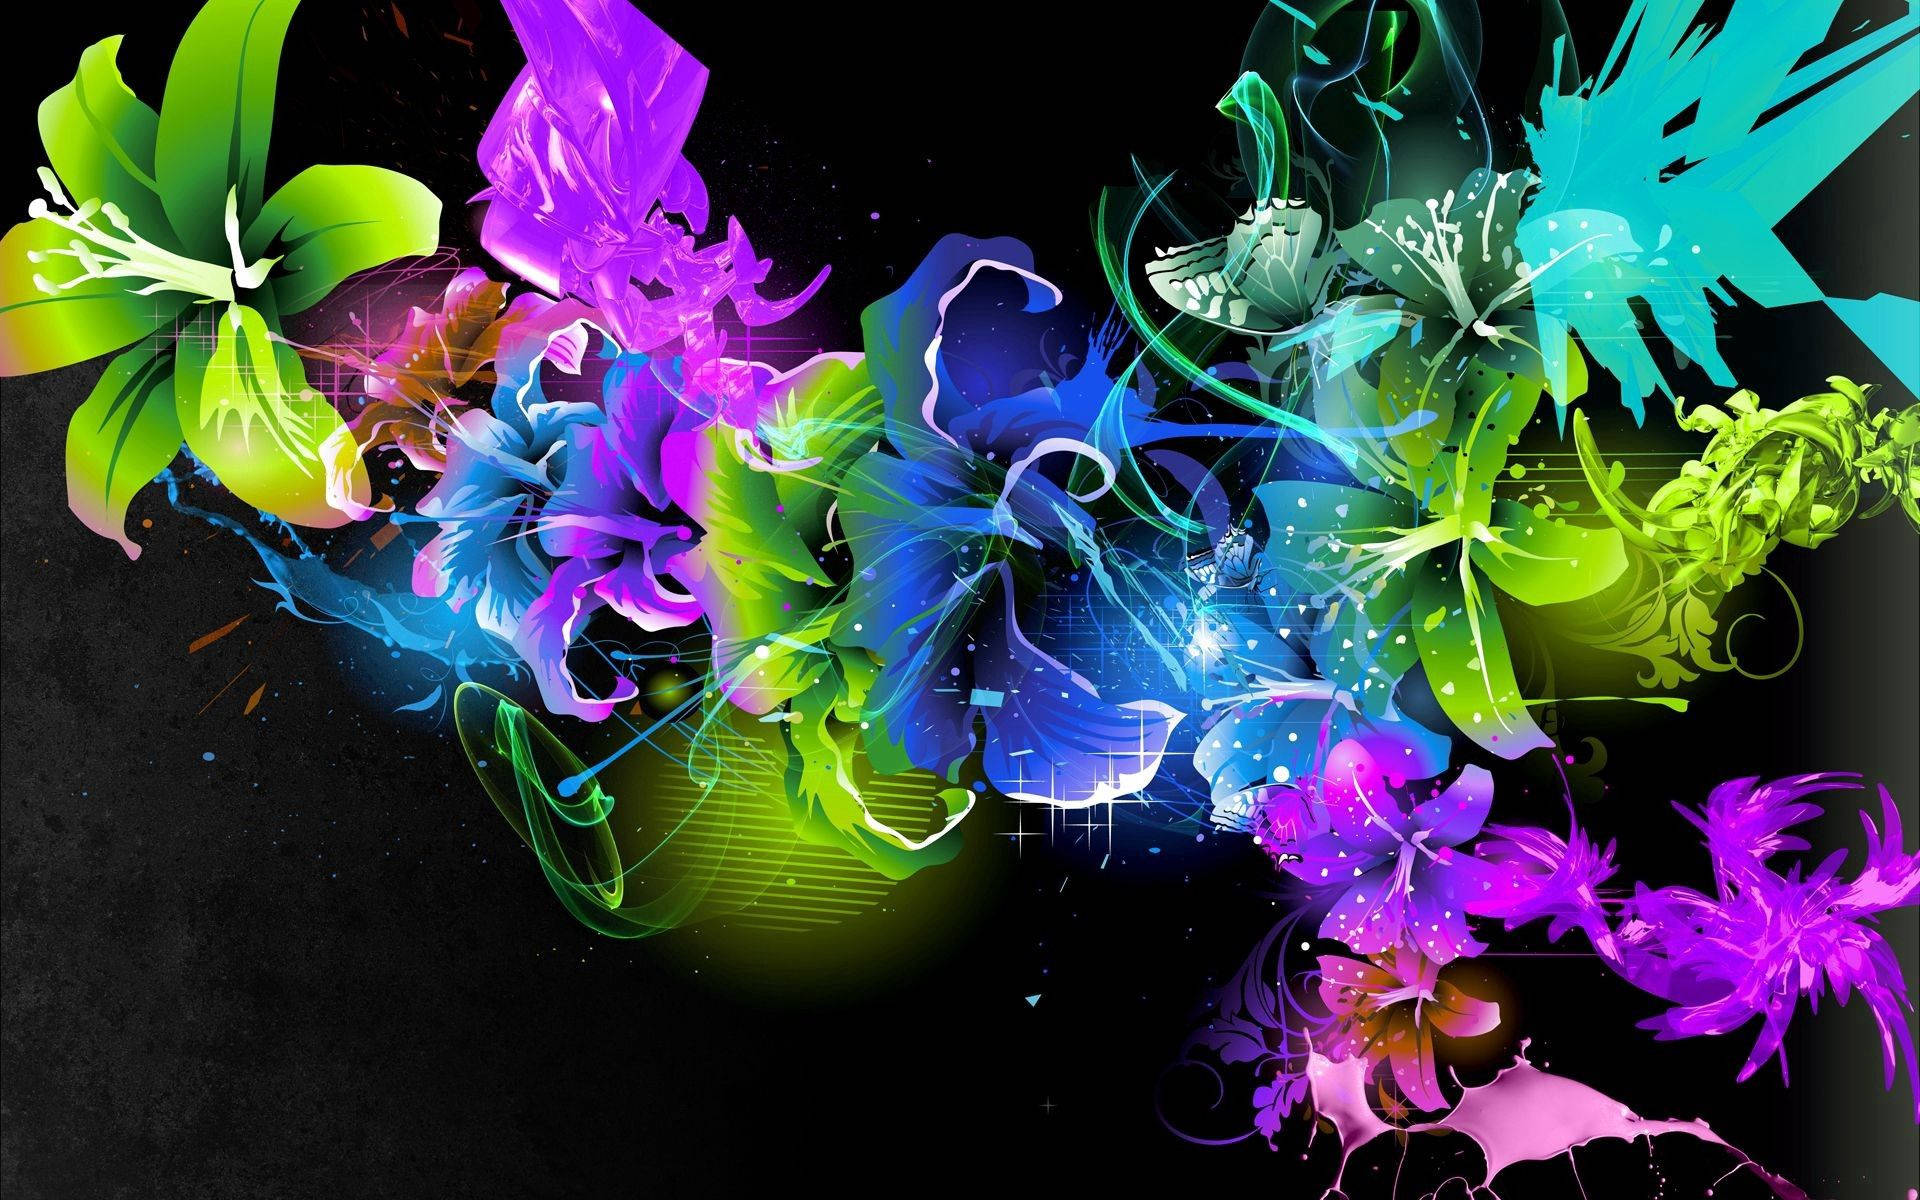 A gorgeous sparkly flower illuminated by a splash of bright colors. Wallpaper